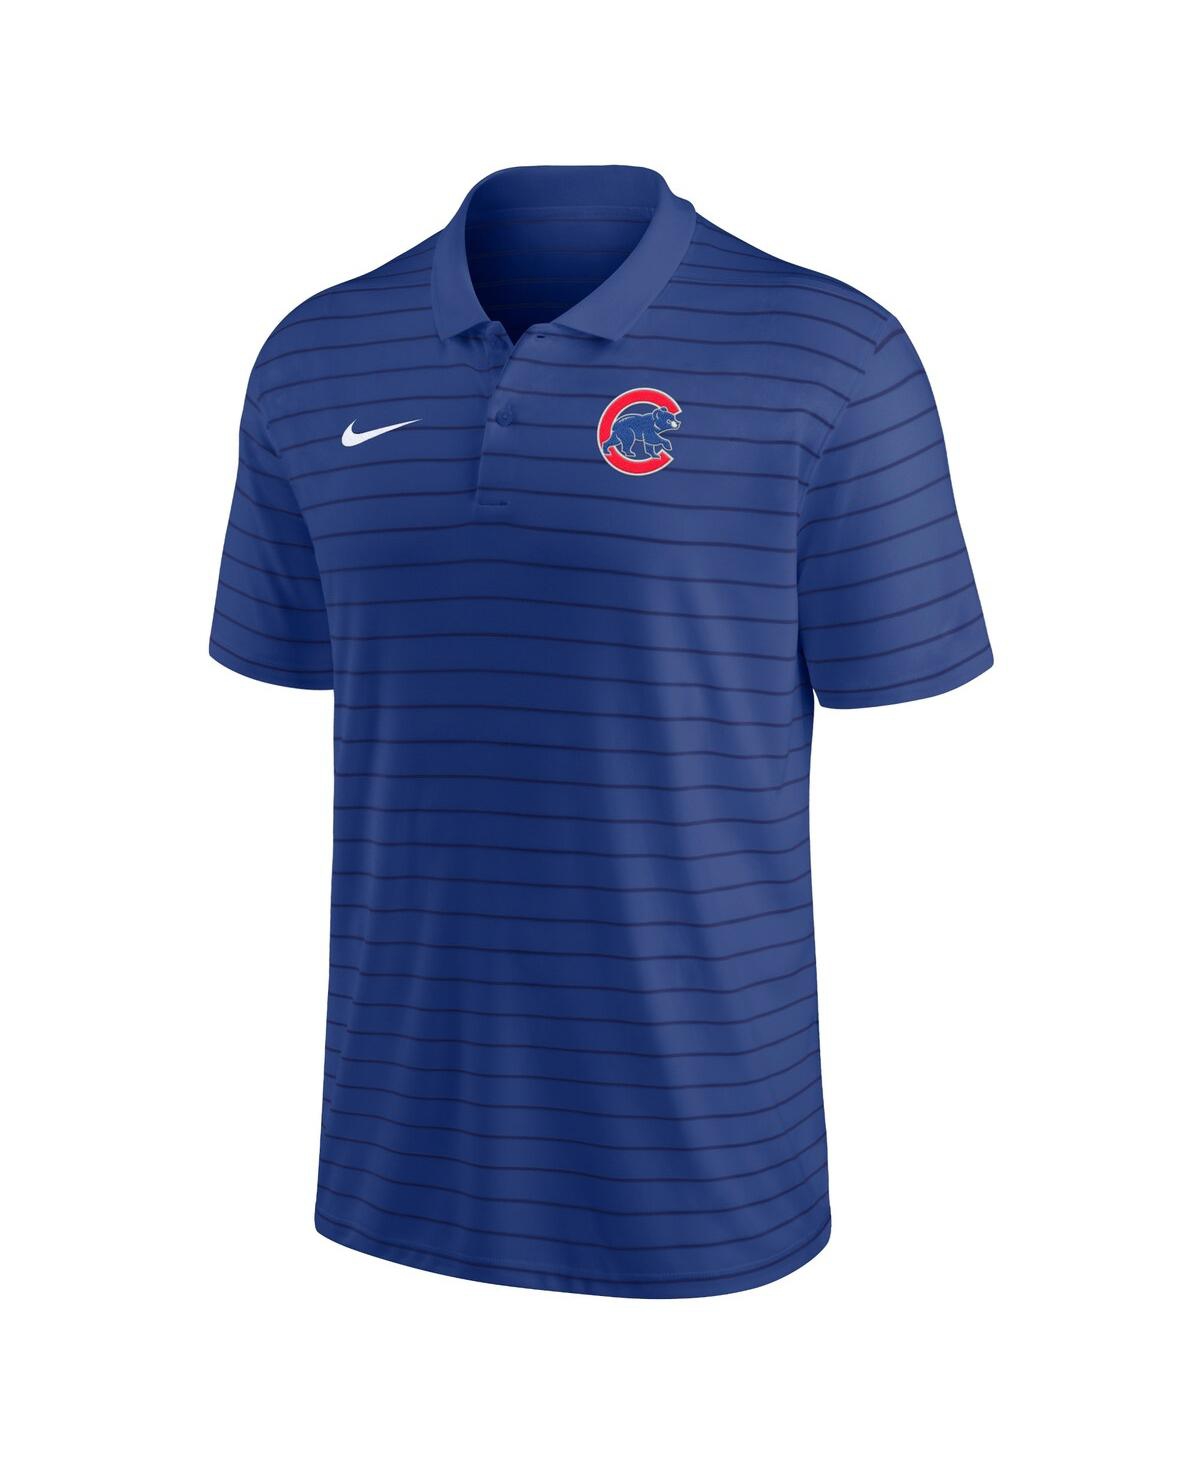 Shop Nike Men's  Royal Chicago Cubs Authentic Collection Victory Striped Performance Polo Shirt